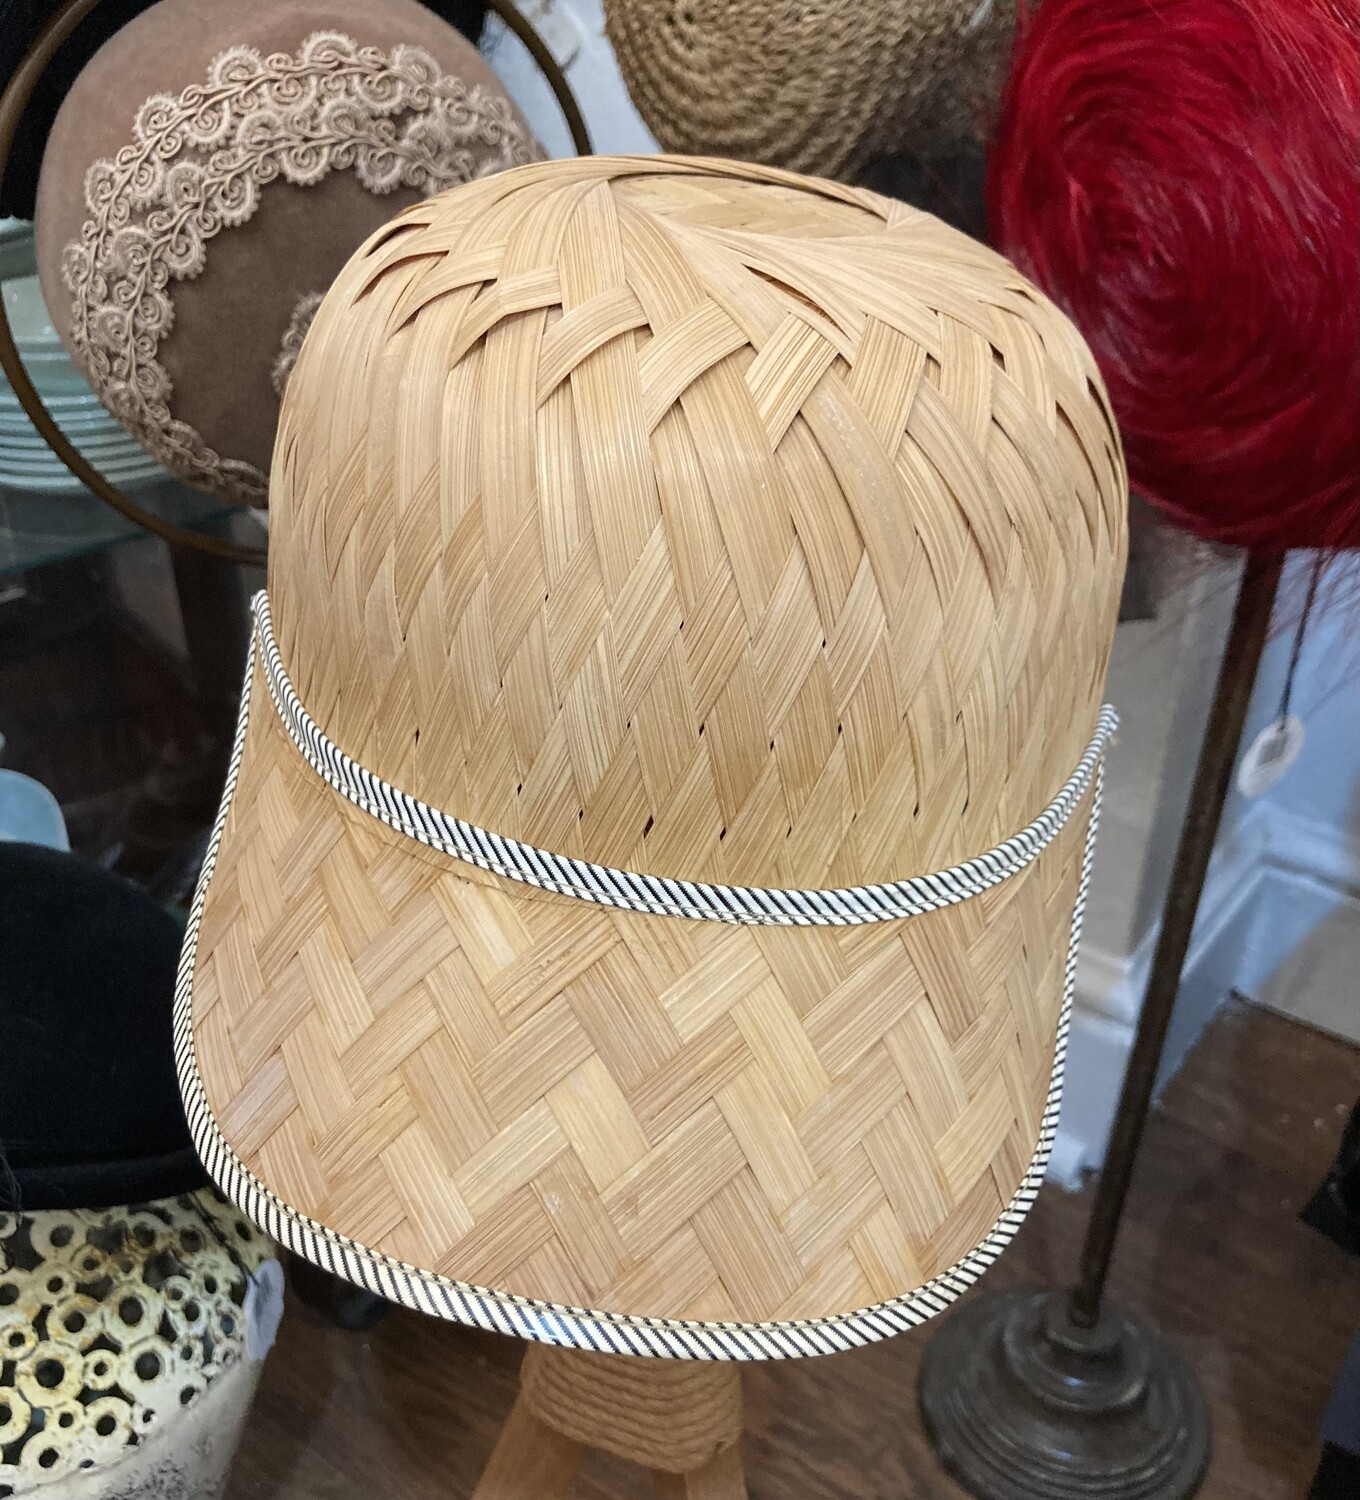 Woven Reed Billed Cap